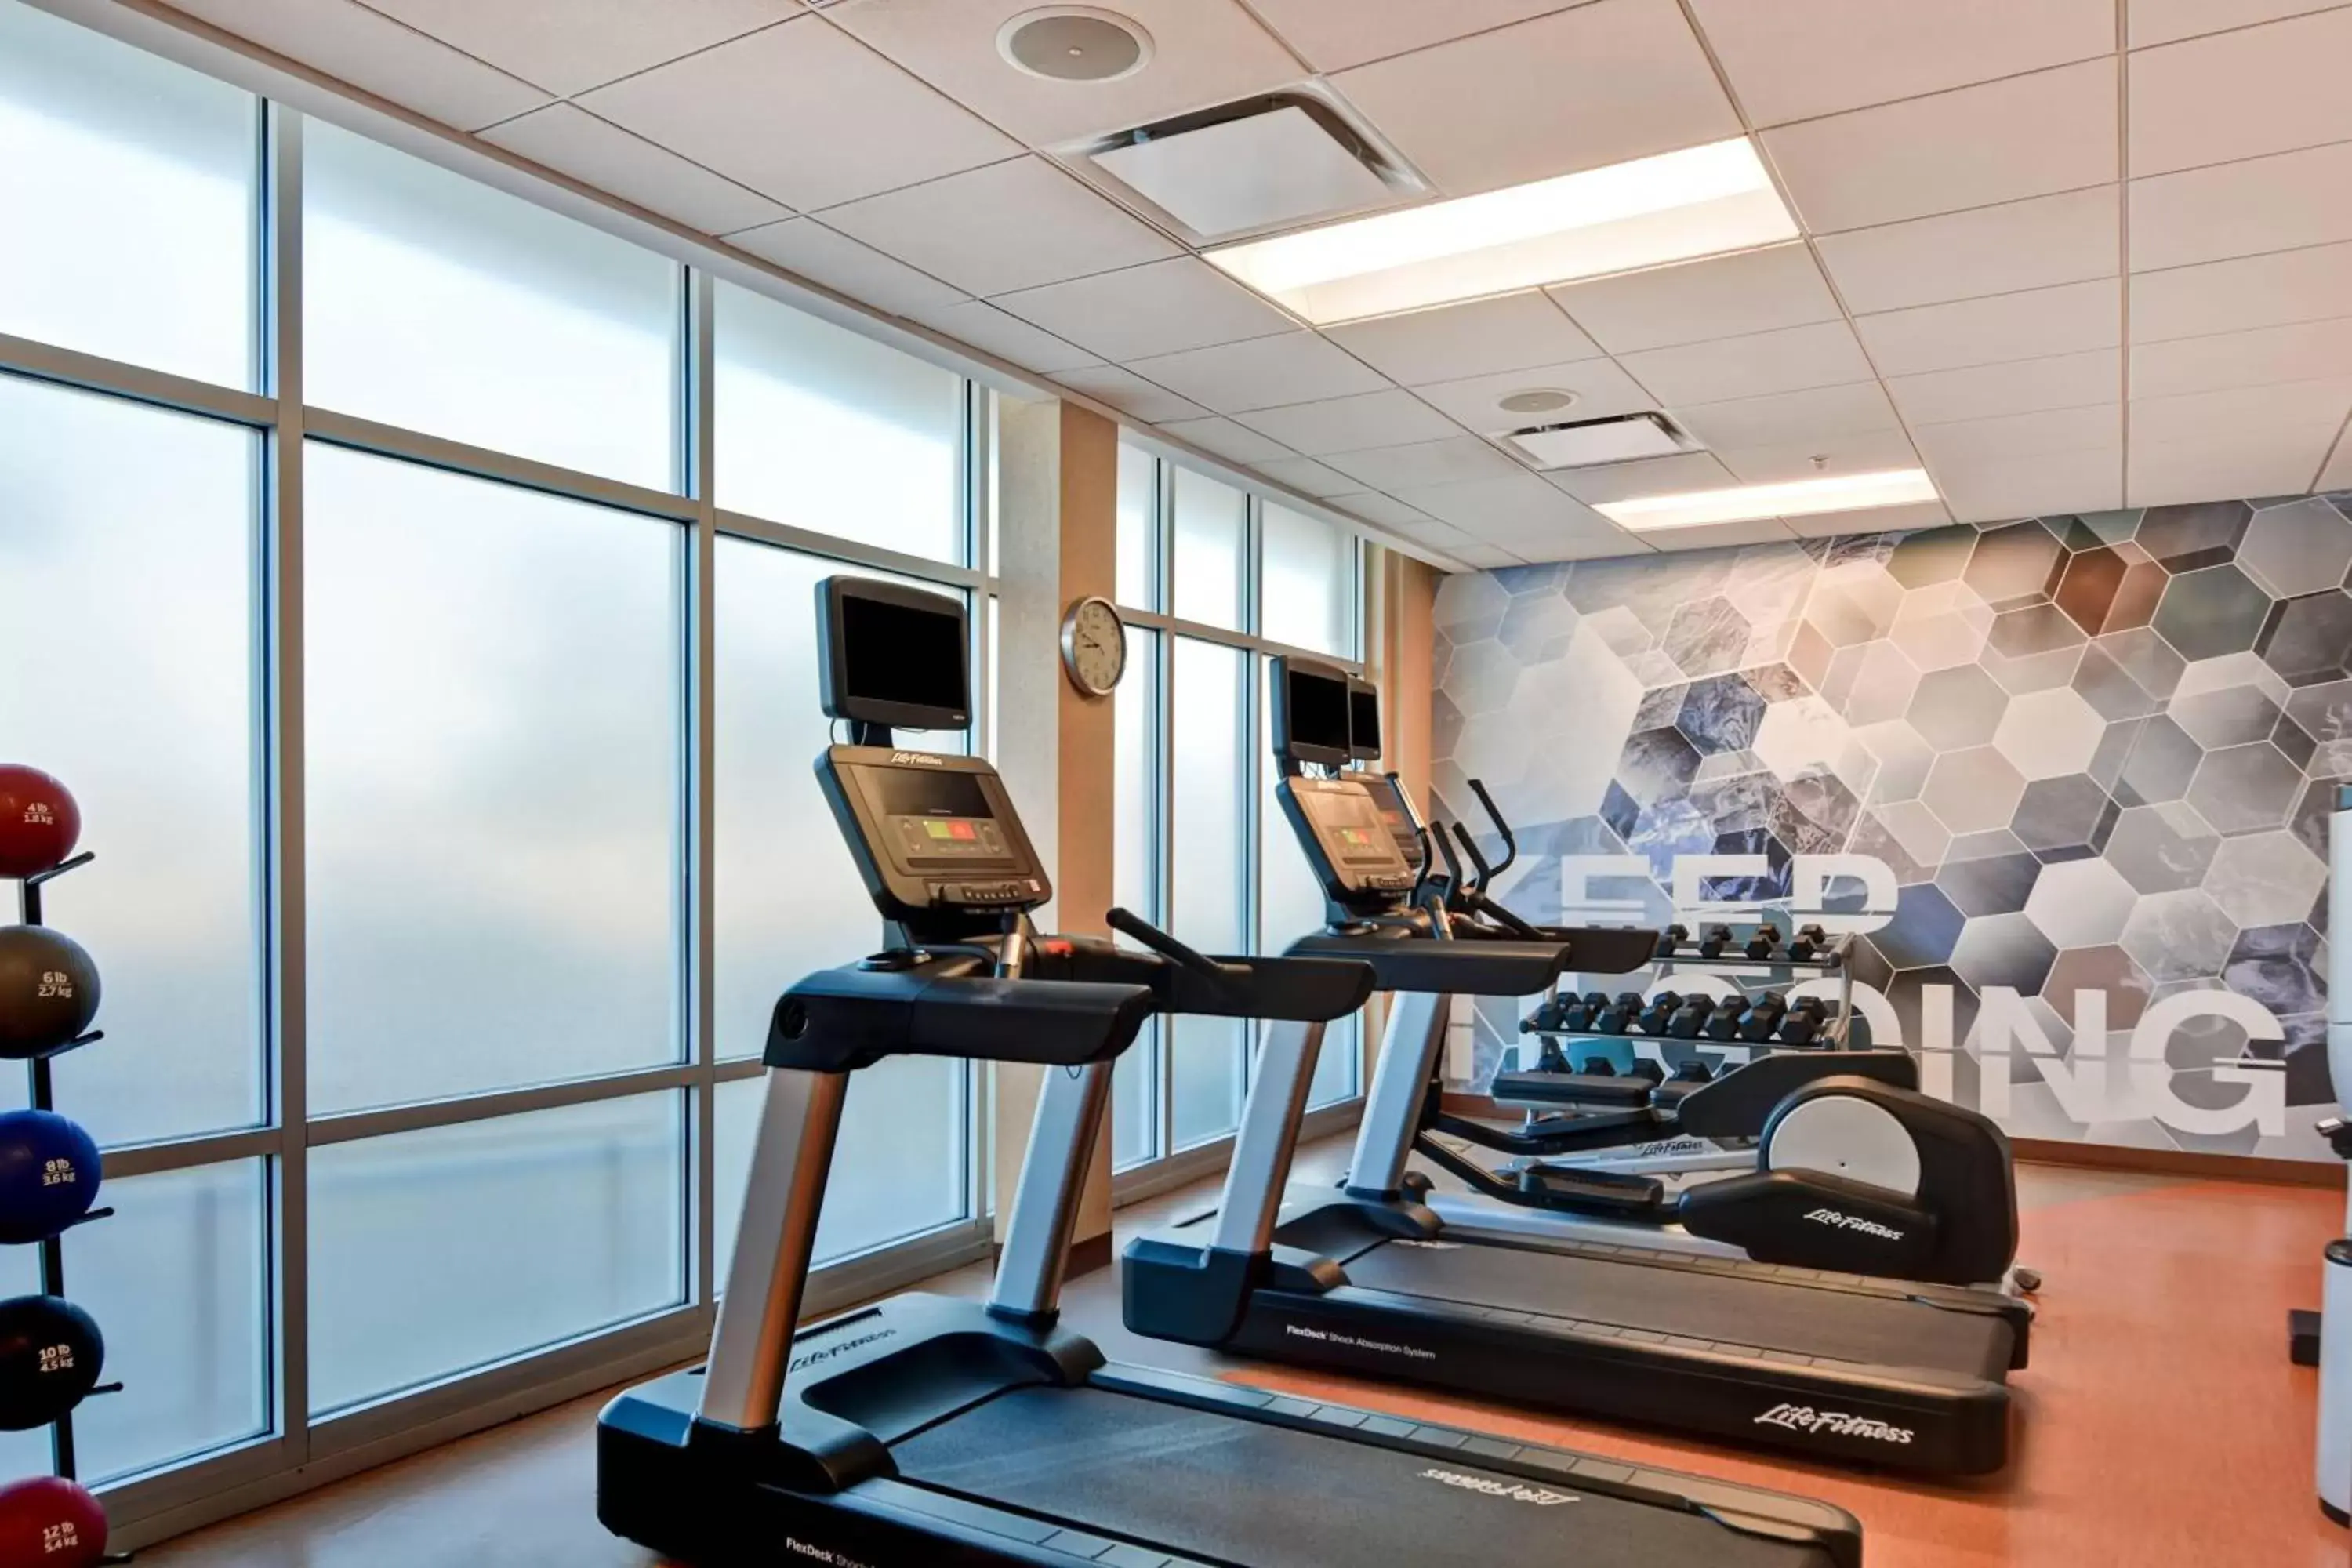 Fitness centre/facilities, Fitness Center/Facilities in SpringHill Suites Denver at Anschutz Medical Campus